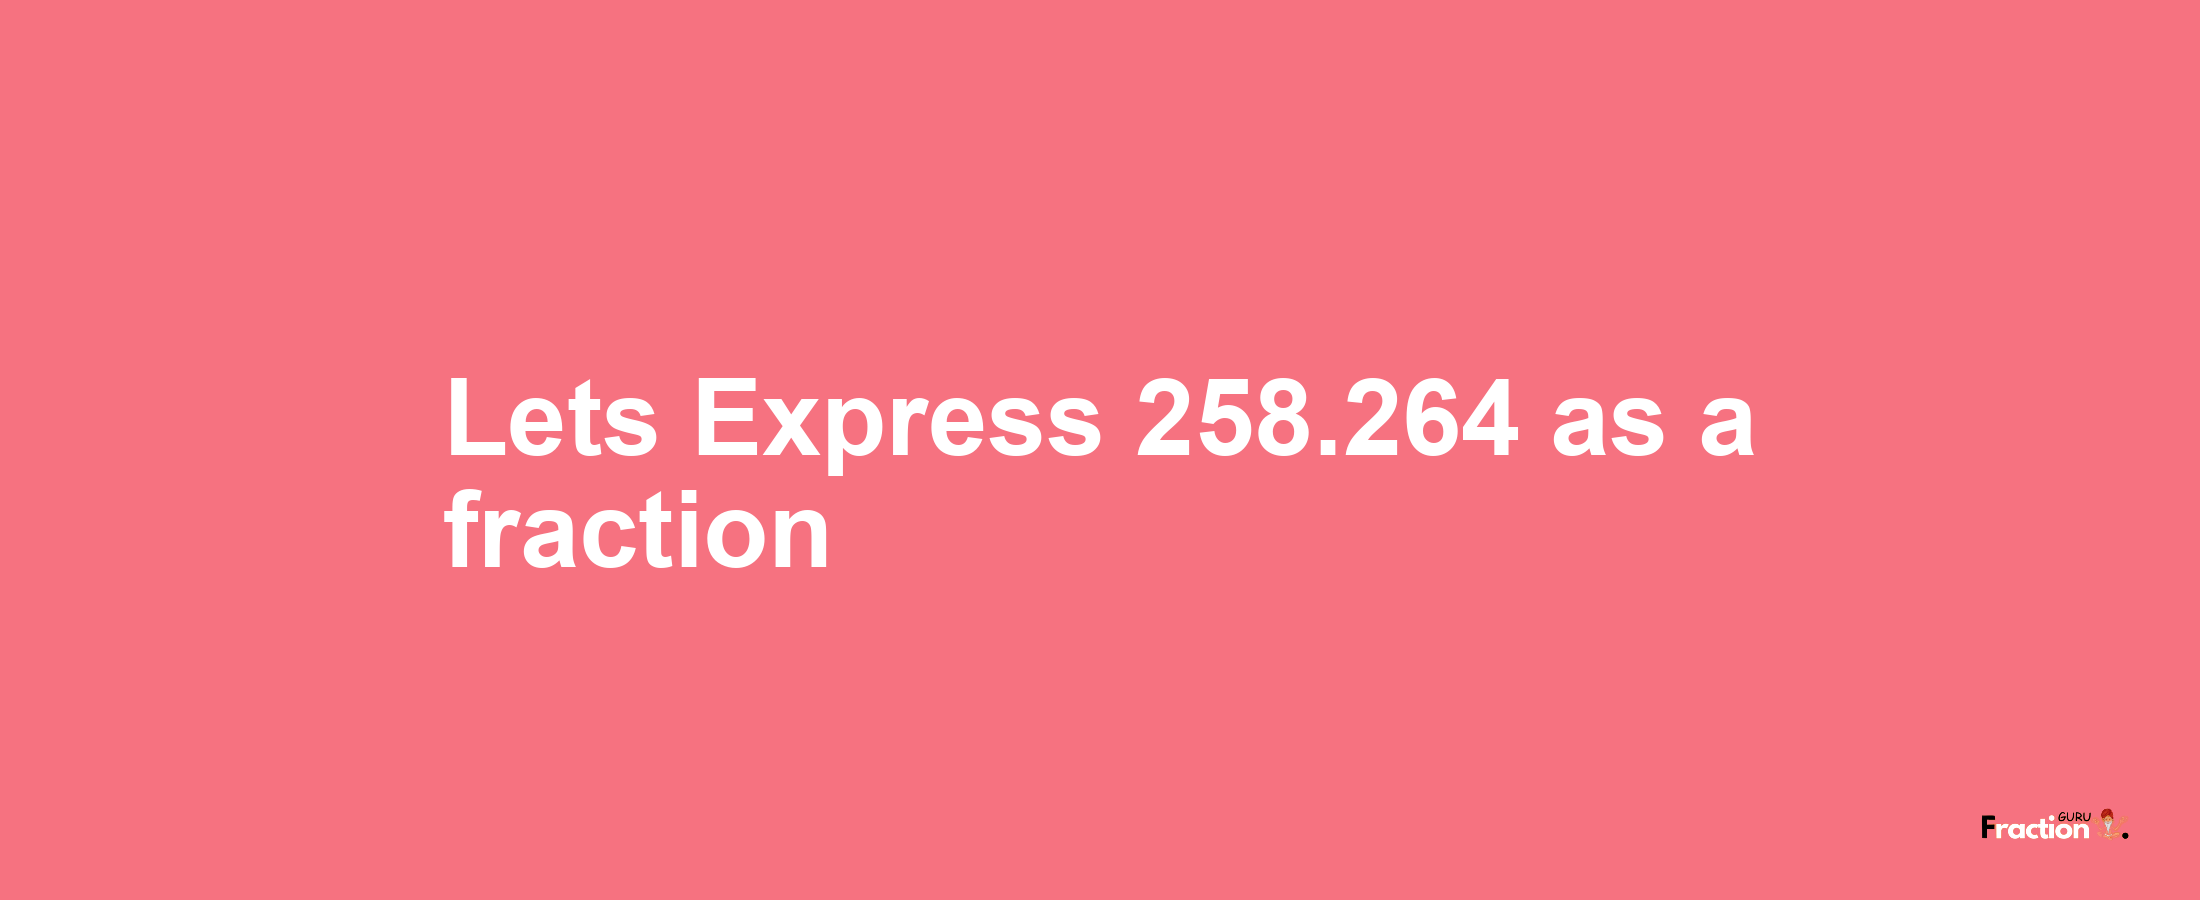 Lets Express 258.264 as afraction